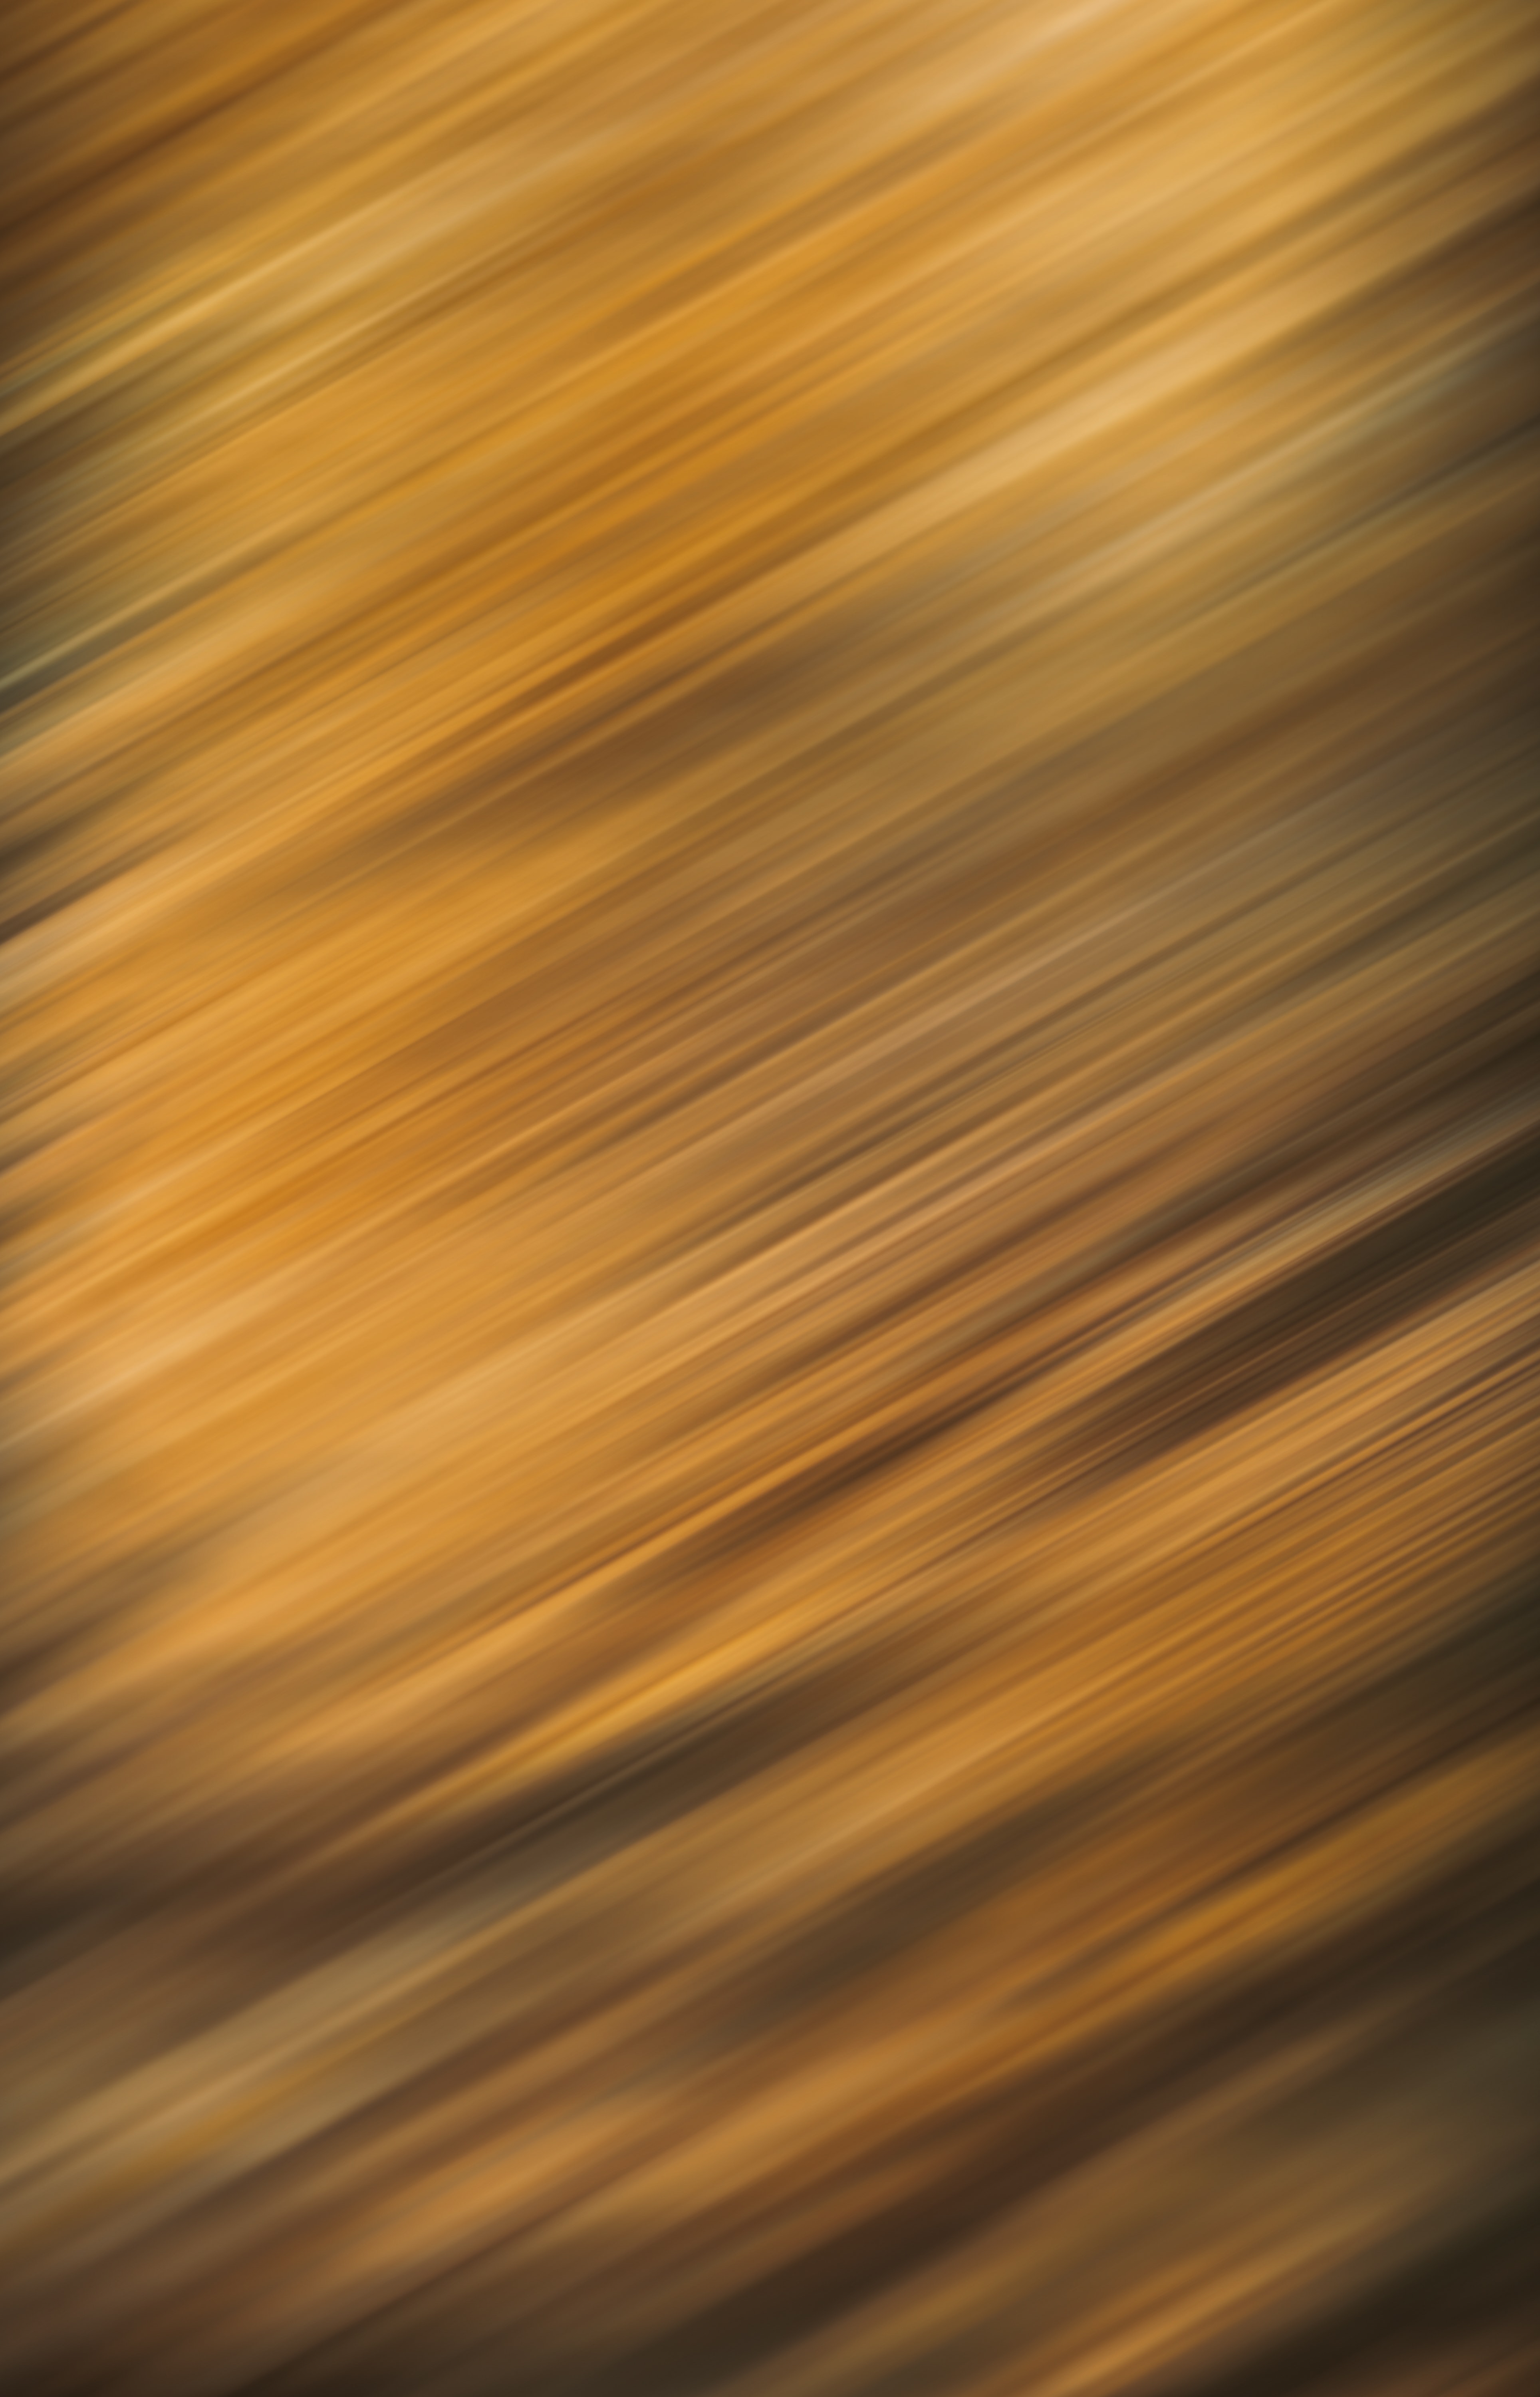 brown, abstract, blur, smooth, obliquely